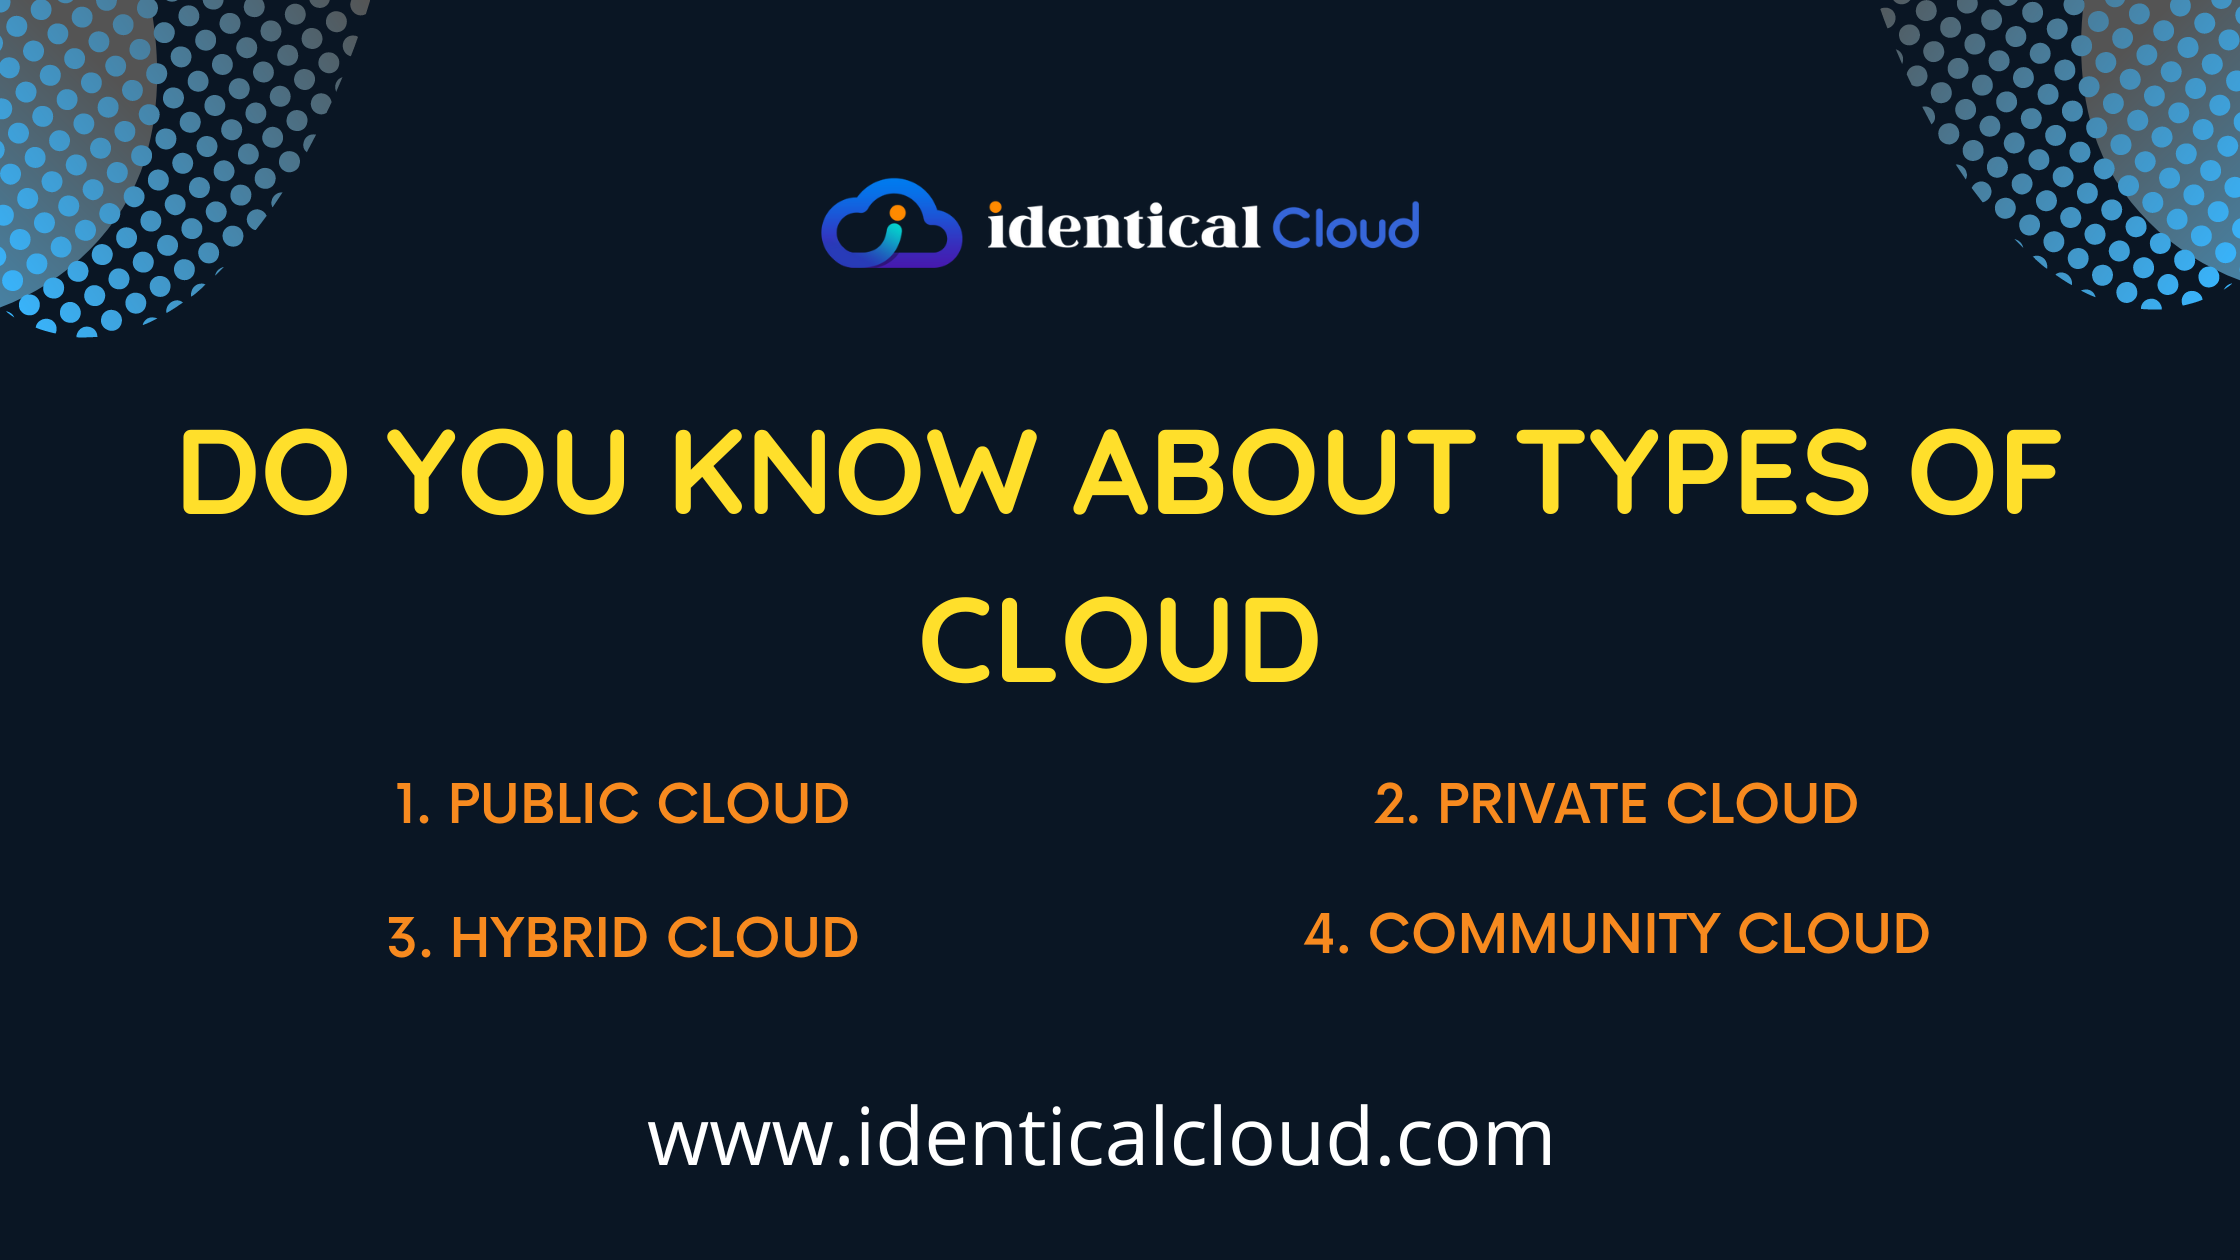 Do you know about Types of Cloud - identicalcloud.com